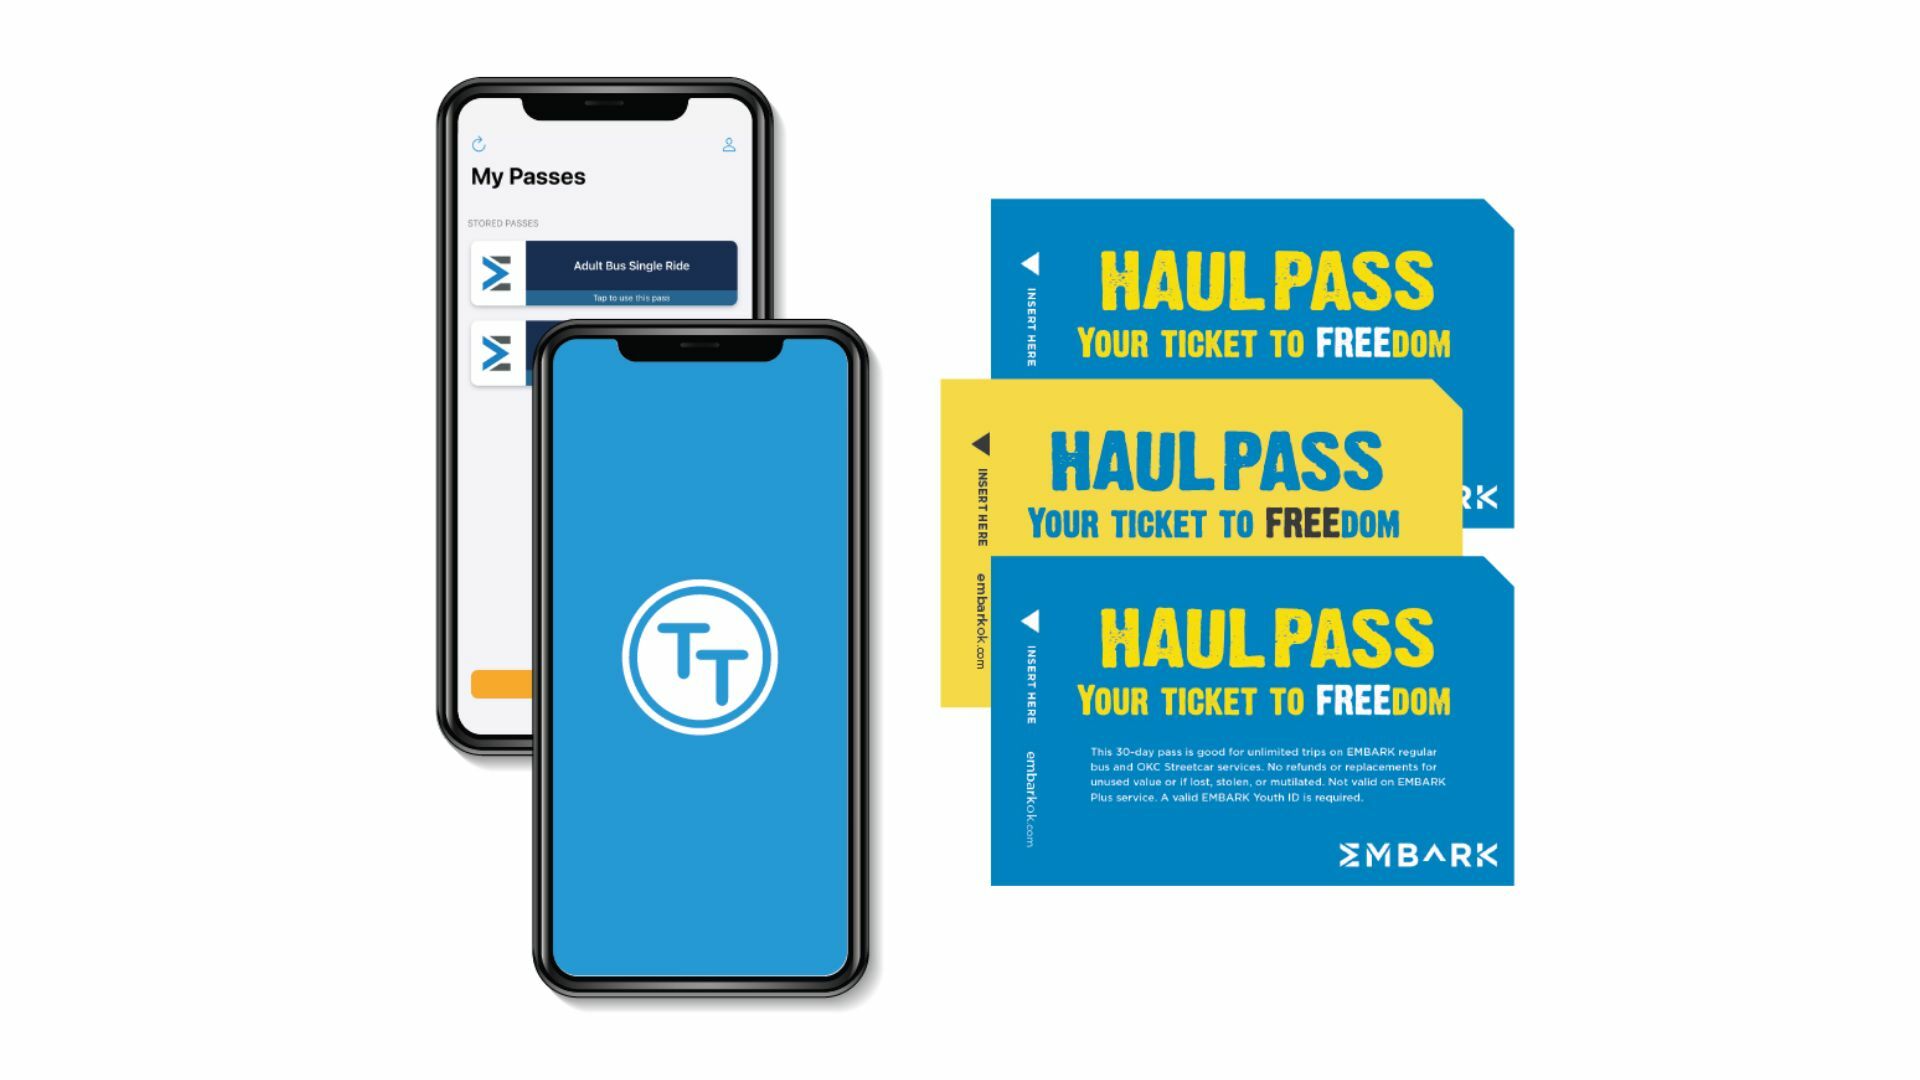 Graphic of Youth Passes available, including Haul Pass.